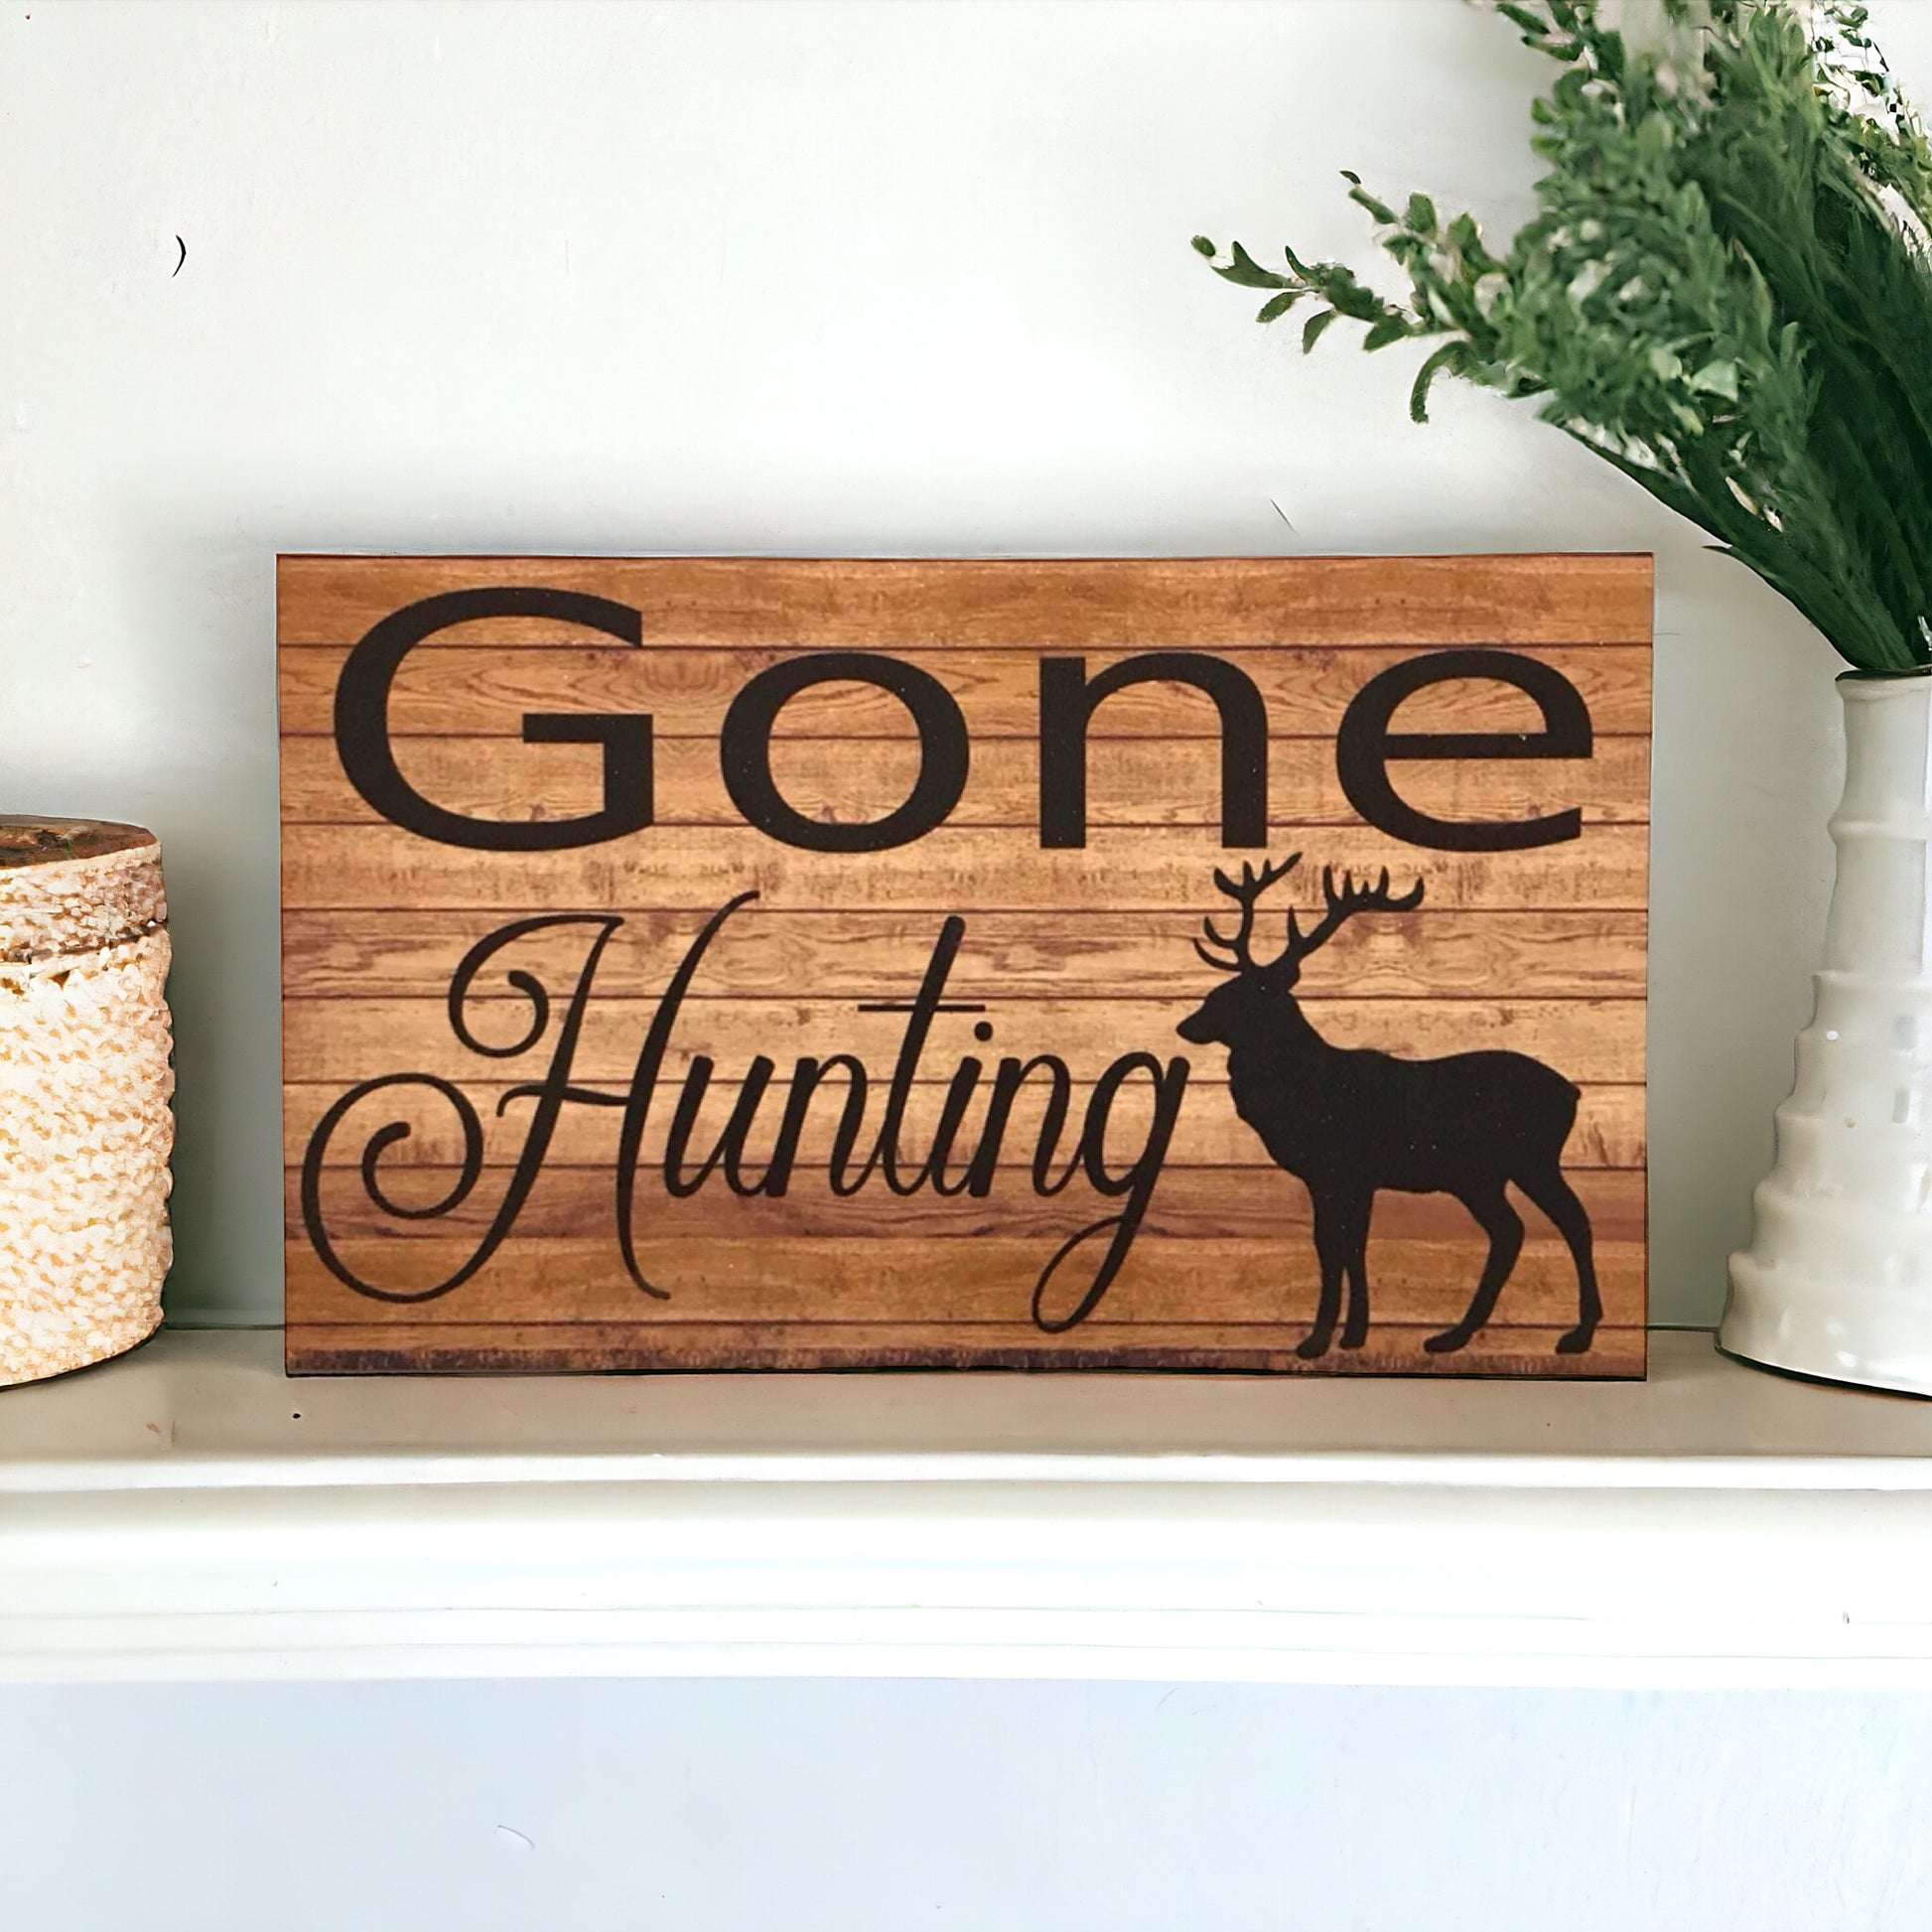 Gone Hunting Deer Stag Sign - The Renmy Store Homewares & Gifts 